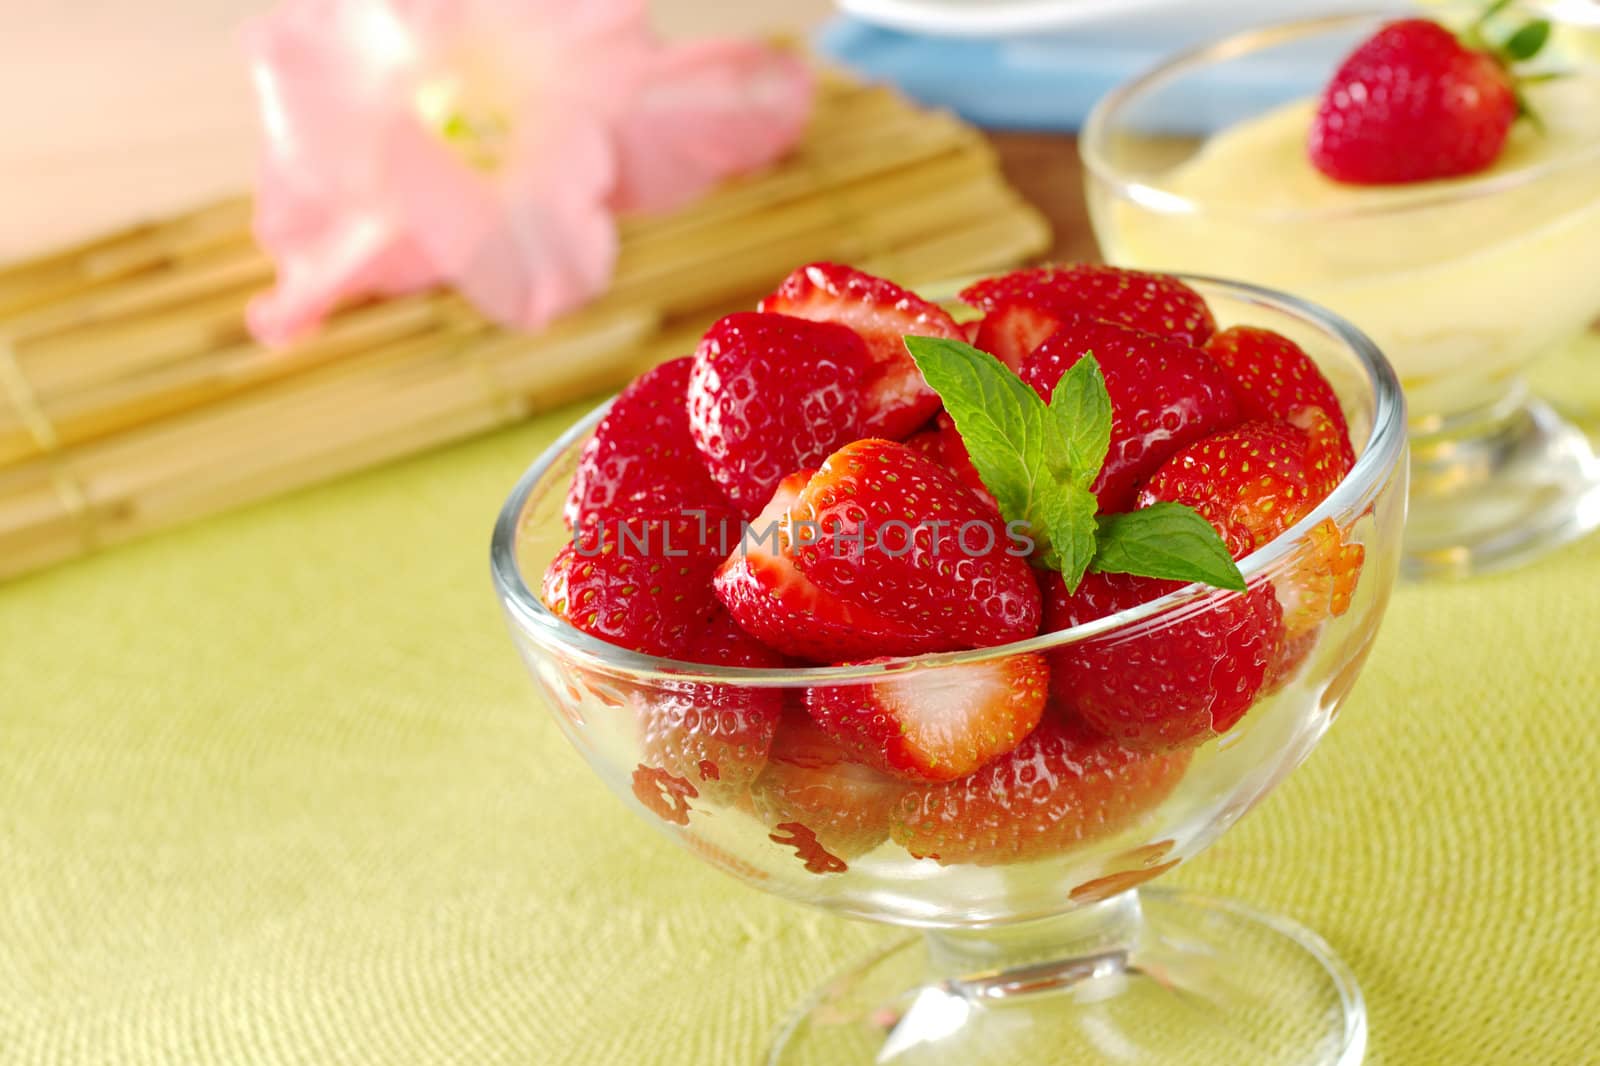 Fresh strawberries cut in half with mint leaf as garnish in a glass bowl  with a cream cheese dessert and gladiolus in the background (Selective Focus, Focus on the strawberries in the front and the mint leaf)